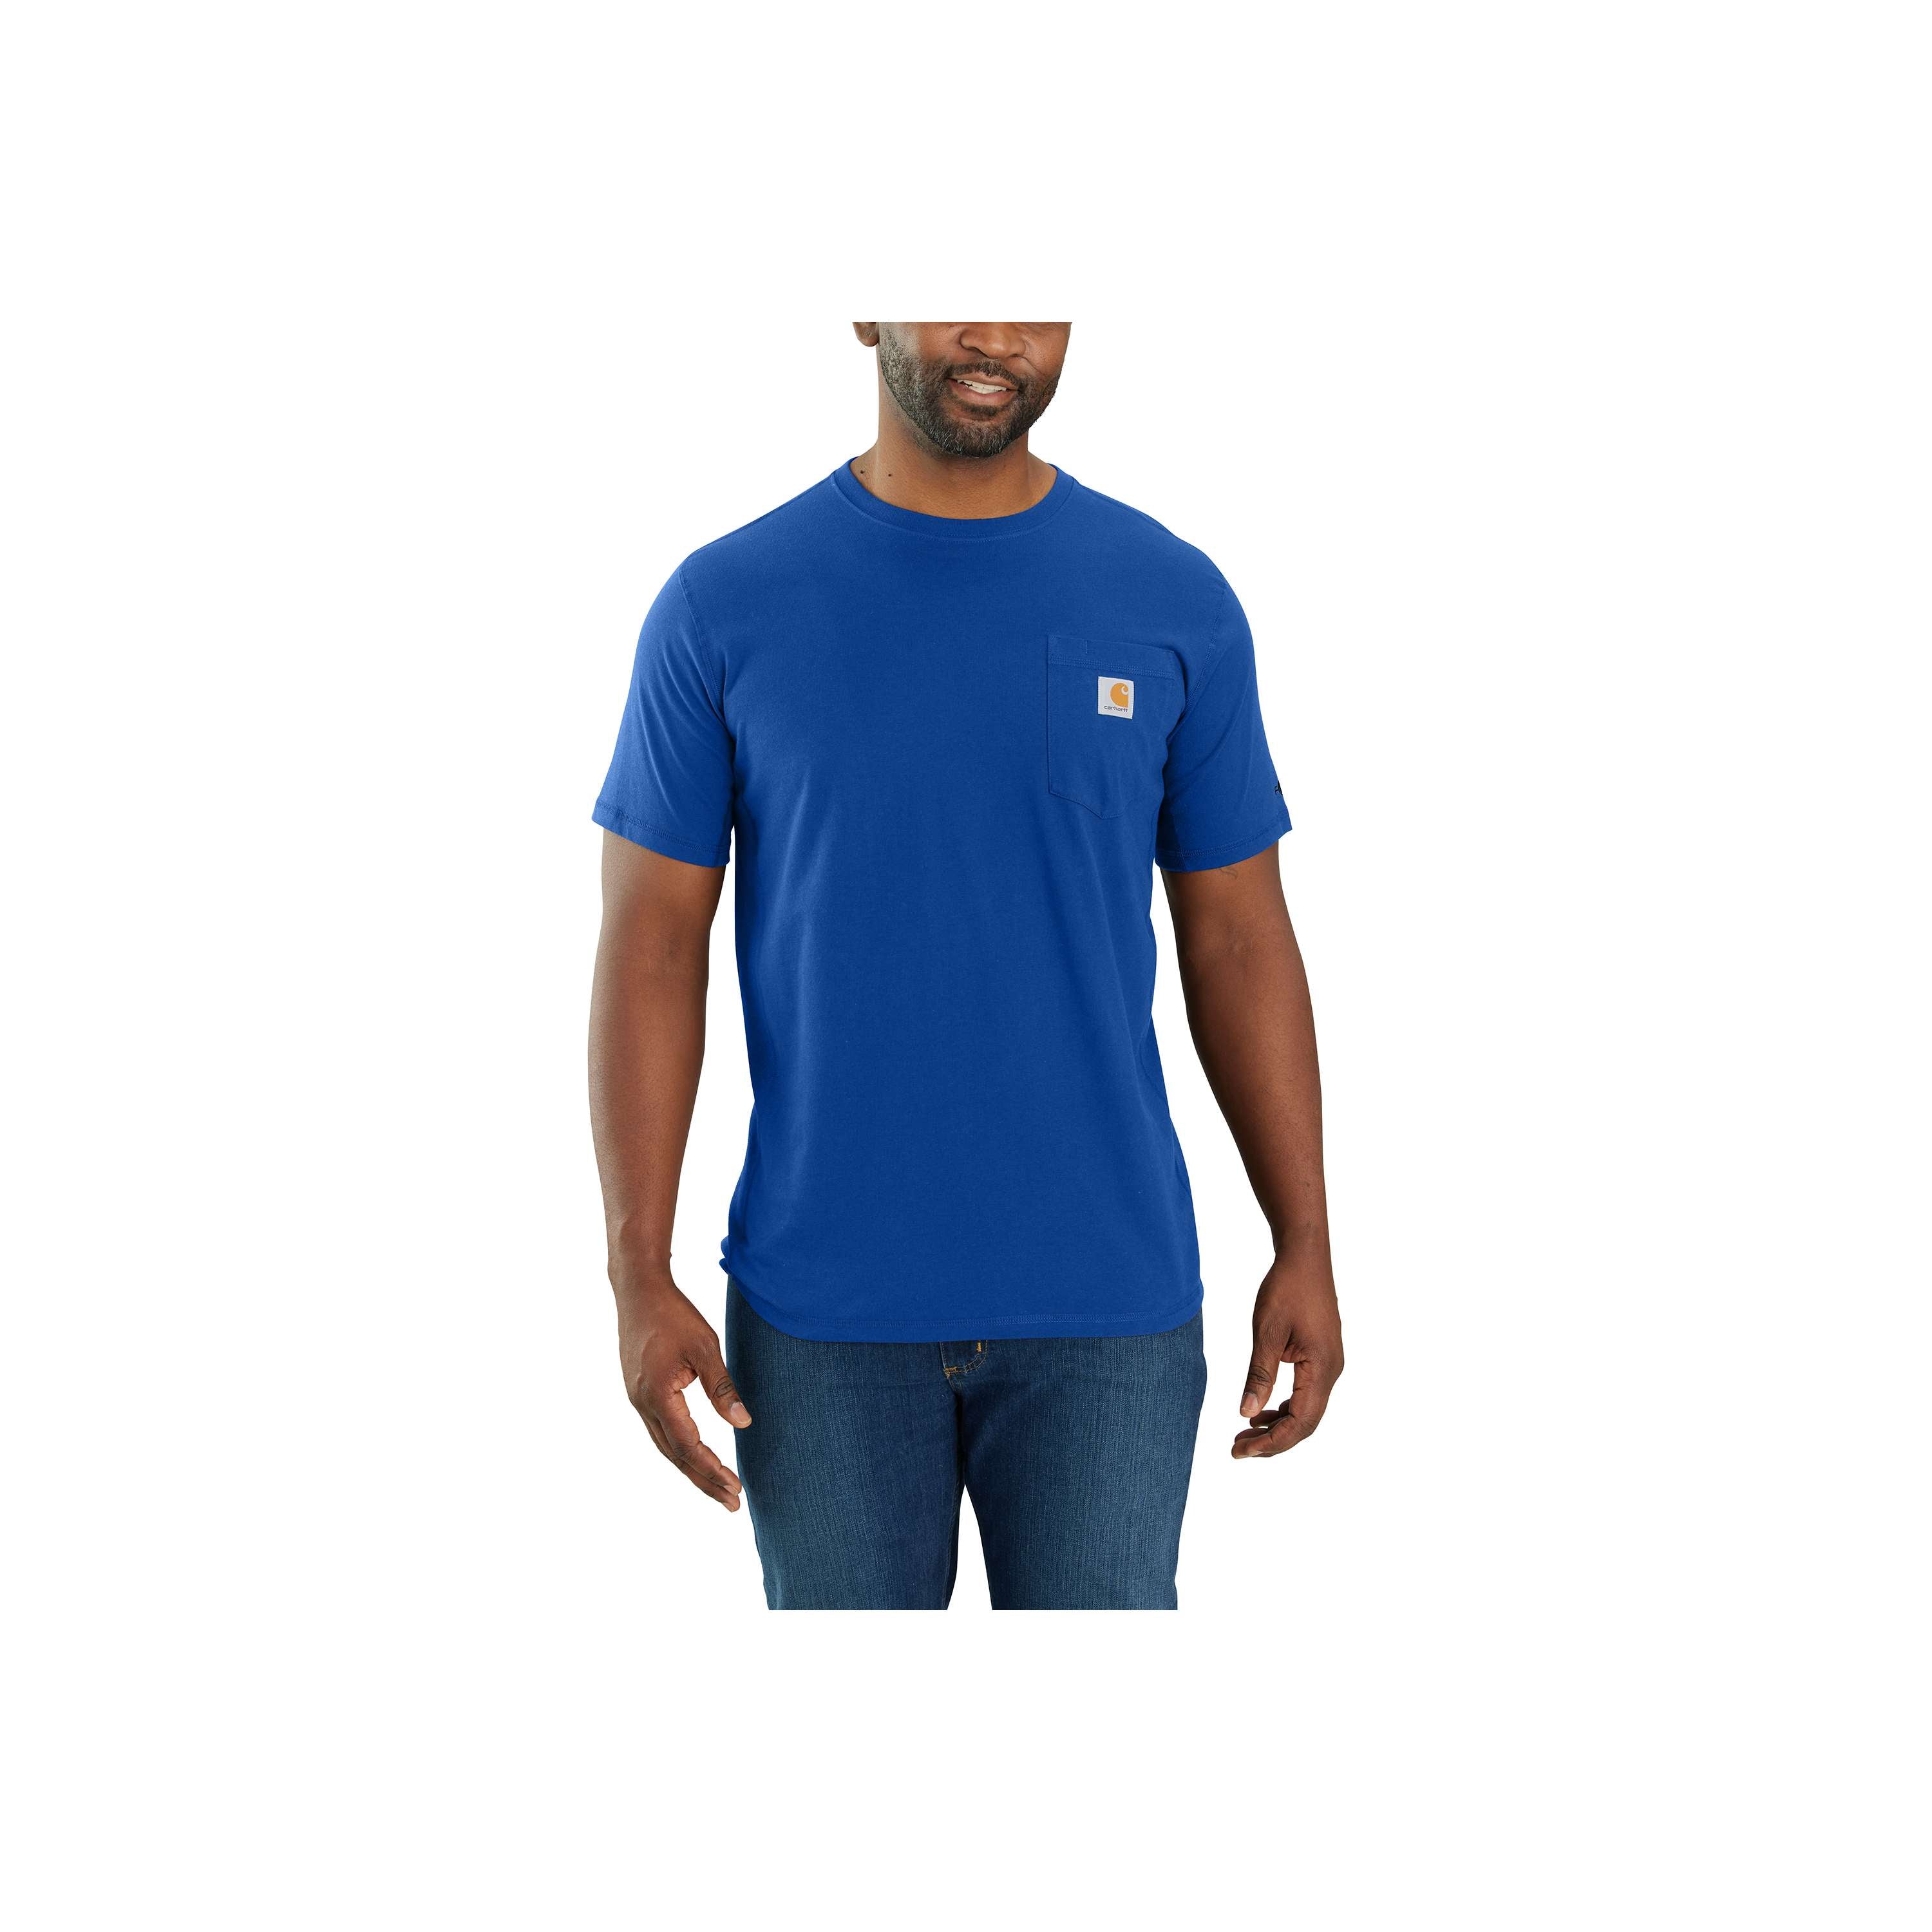 Carhartt Force Solid Short Sleeve Shirt with custom logo embroidery